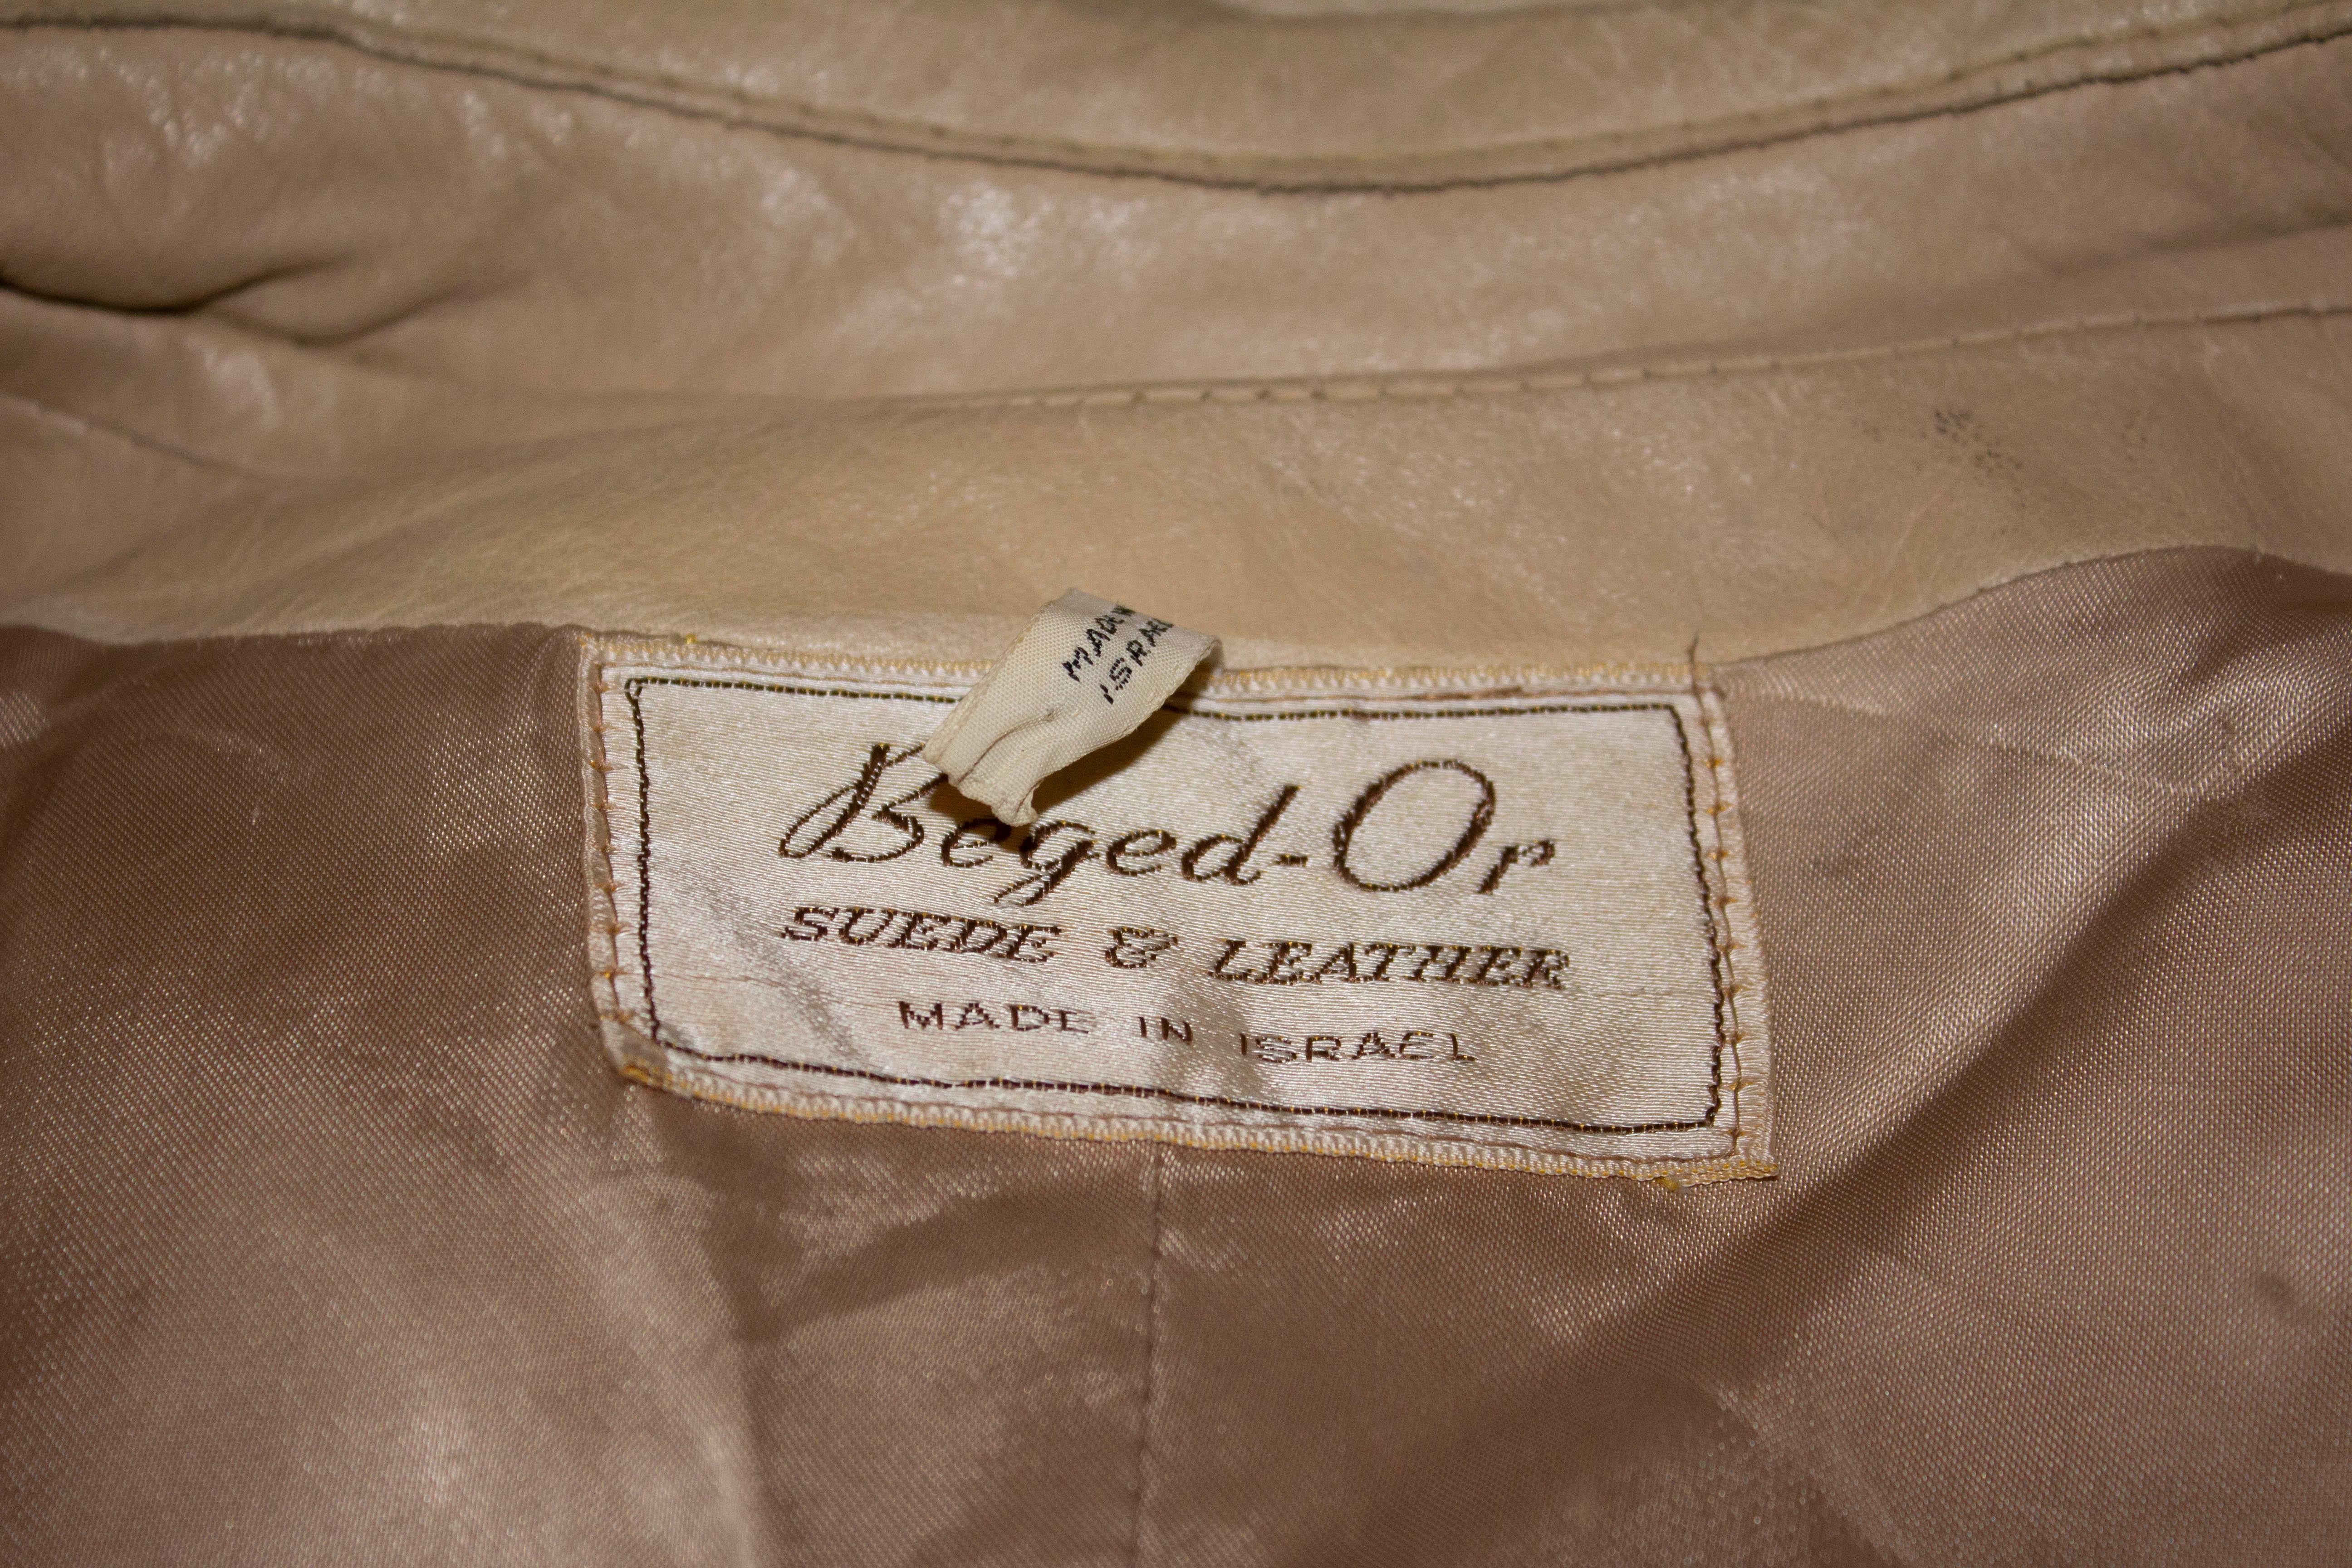 A classic leather  trench coat by Beged d'Or. The coat is lined  but the belt is missing.
Size 54 Measurements: Chest up to 42'', waist up to 42'' , length 44''